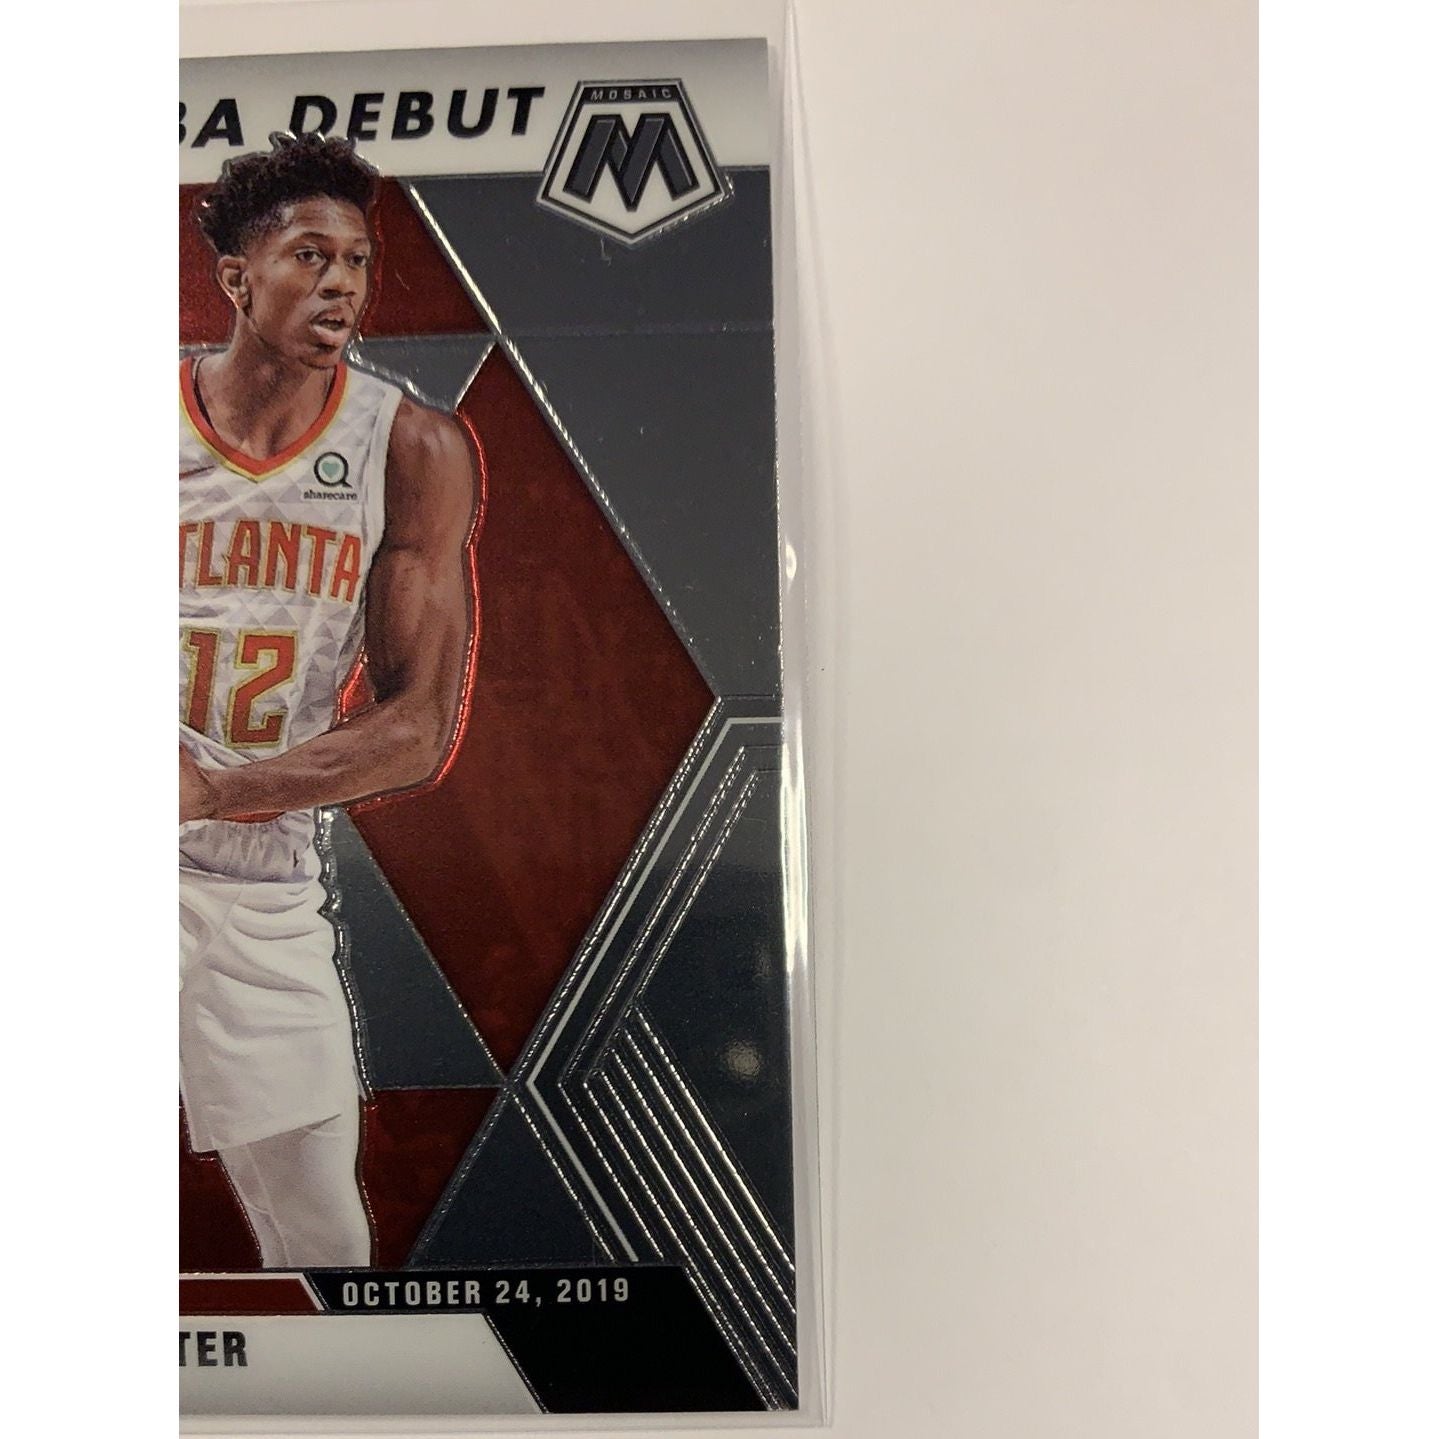  2019-20 Panini Mosaic De’Andre Hunter RC #266  Local Legends Cards & Collectibles